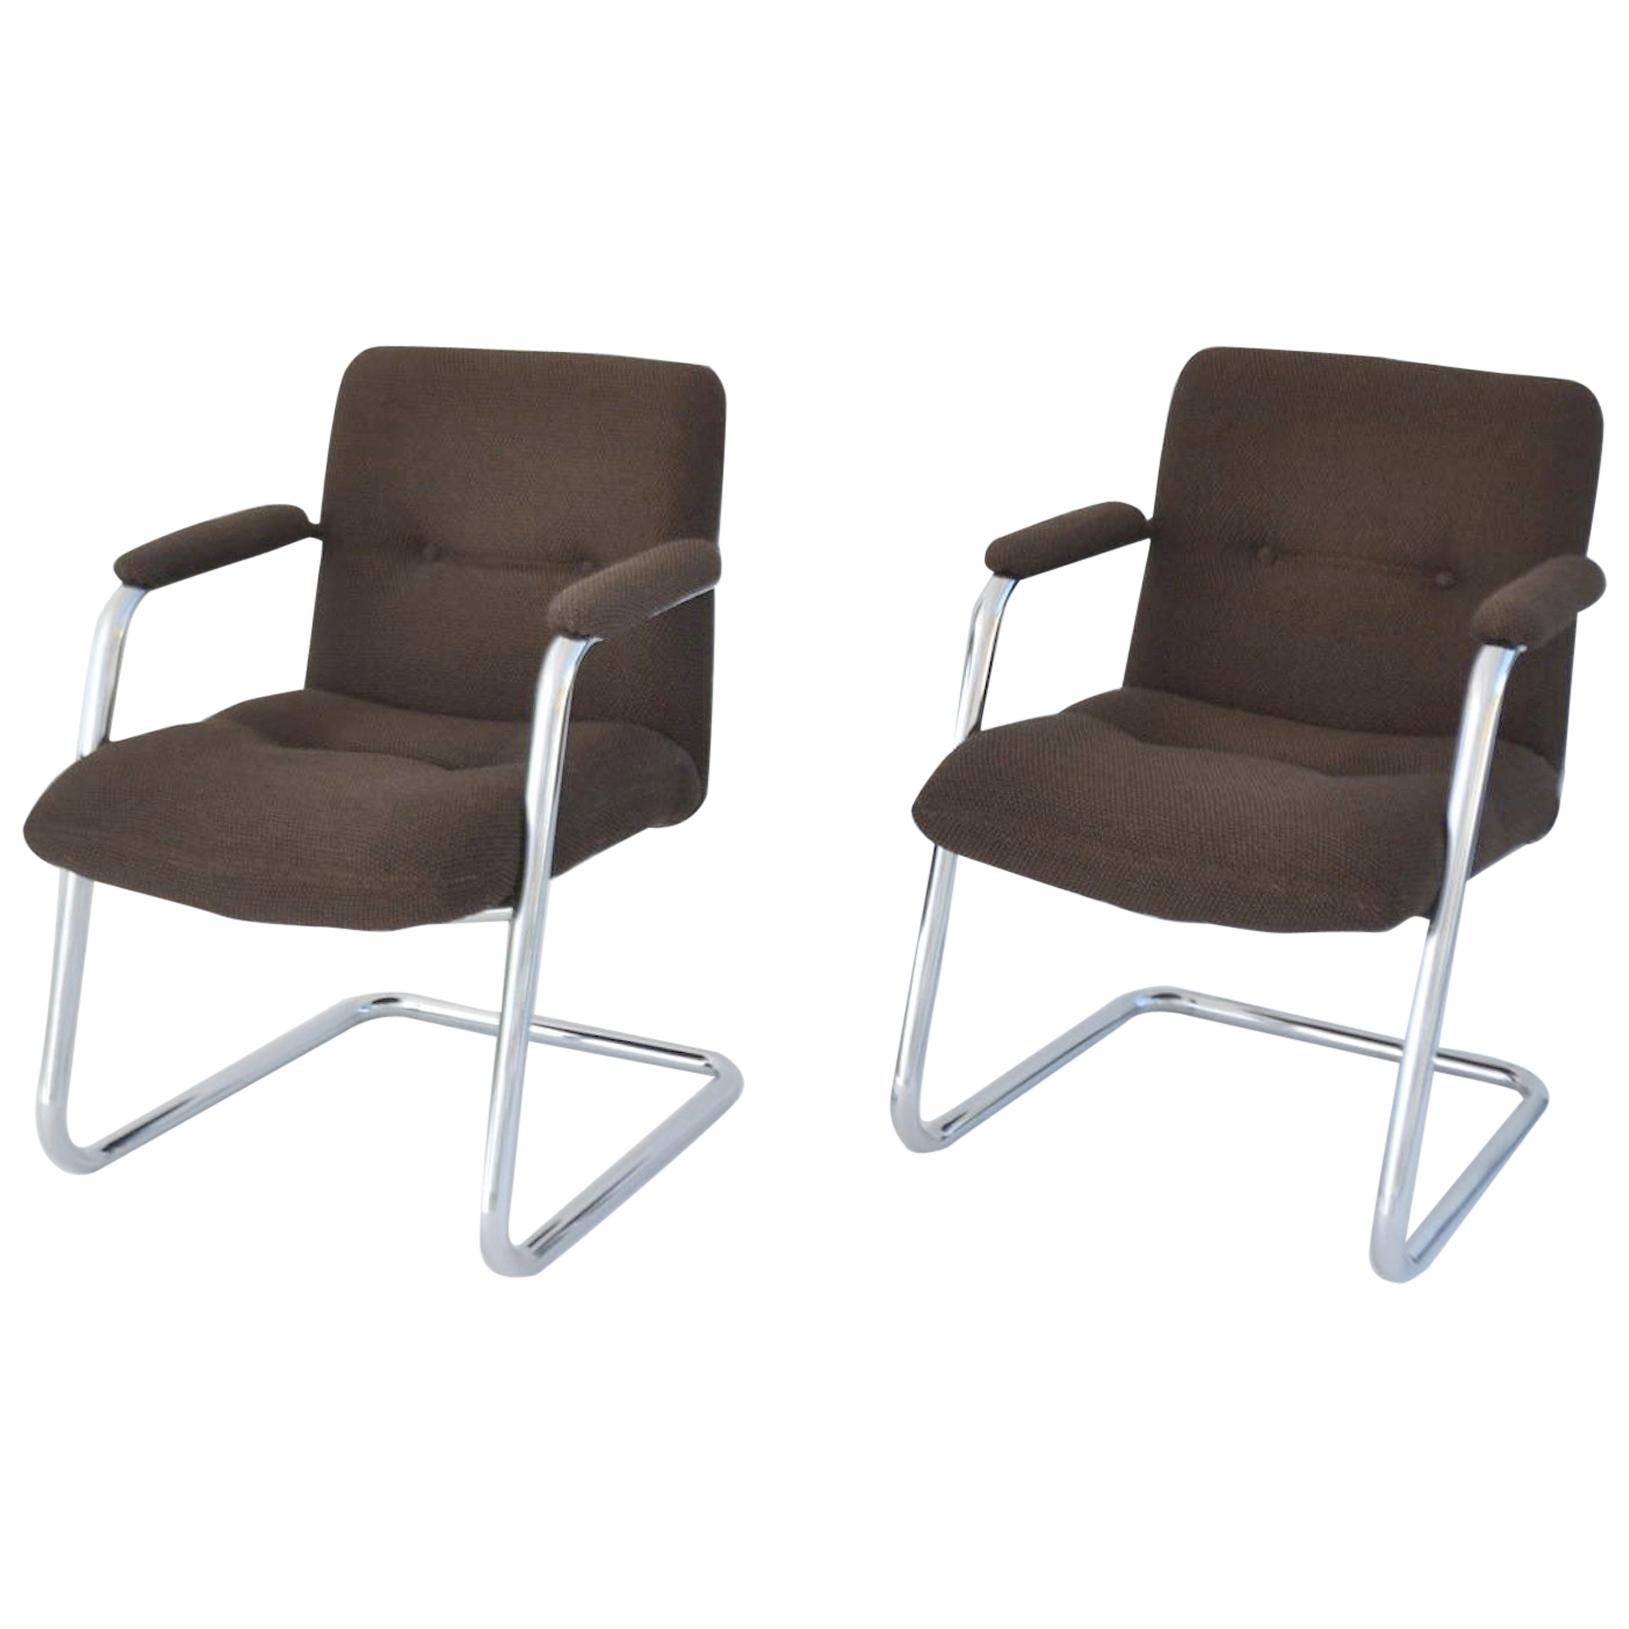 Pair of Cantilever Midcentury Lounge Chairs For Sale